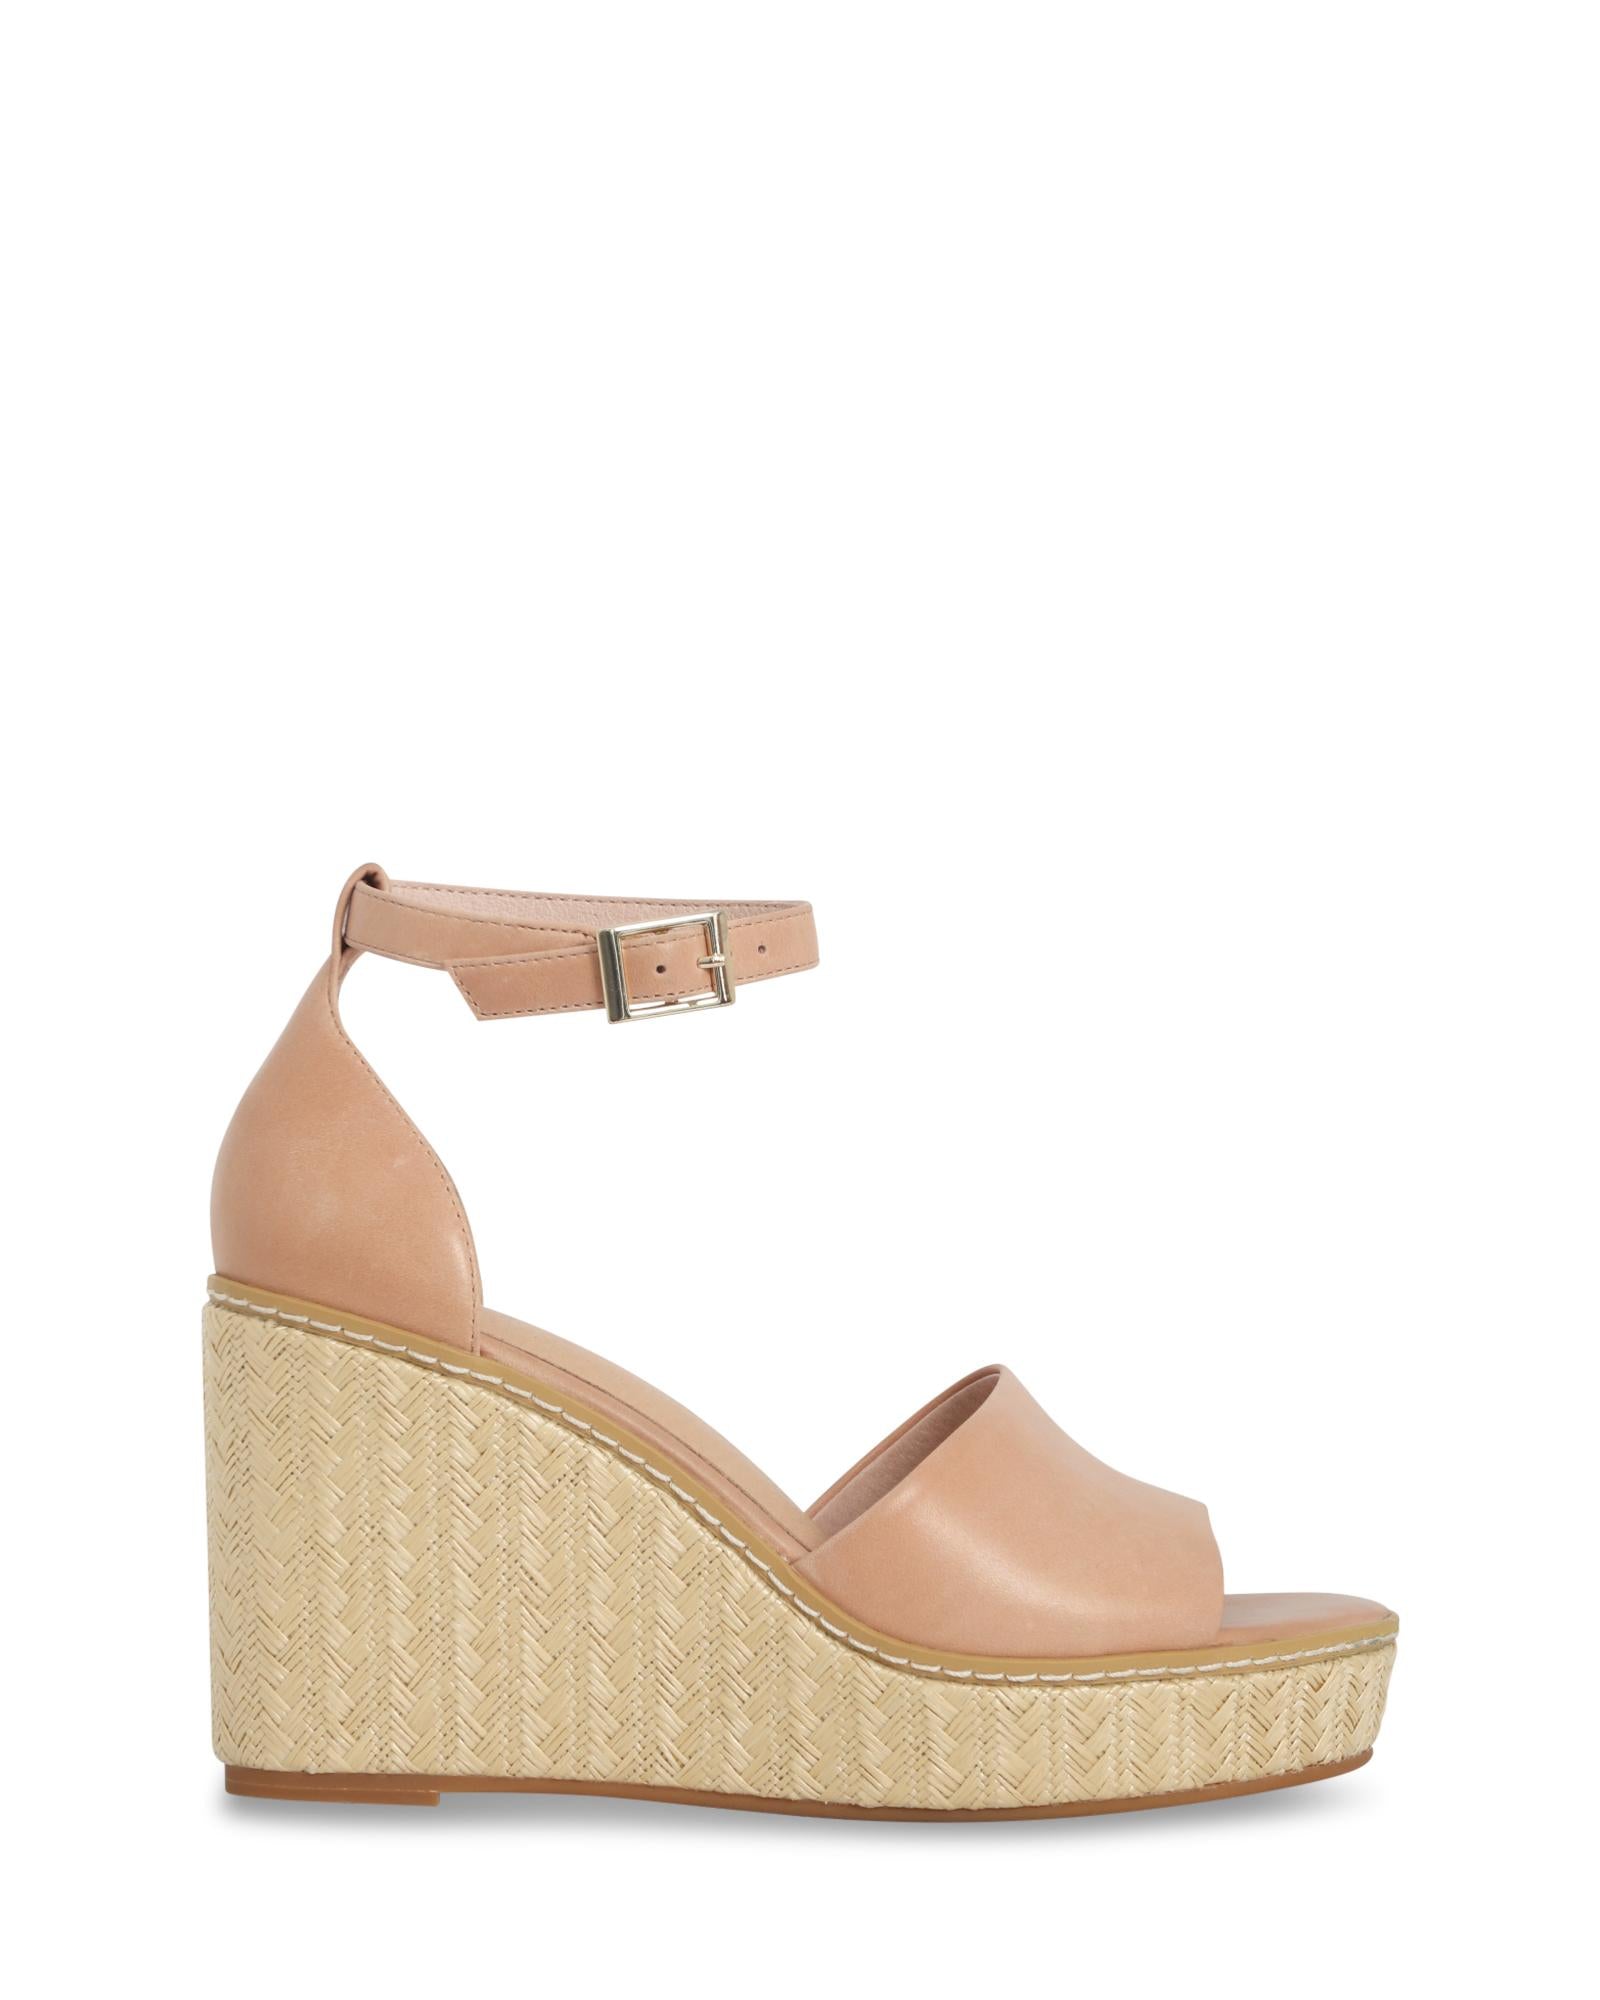 Tilley Nude 9.5cm Woven Raffia Wedge with Adjustable Ankle Straps